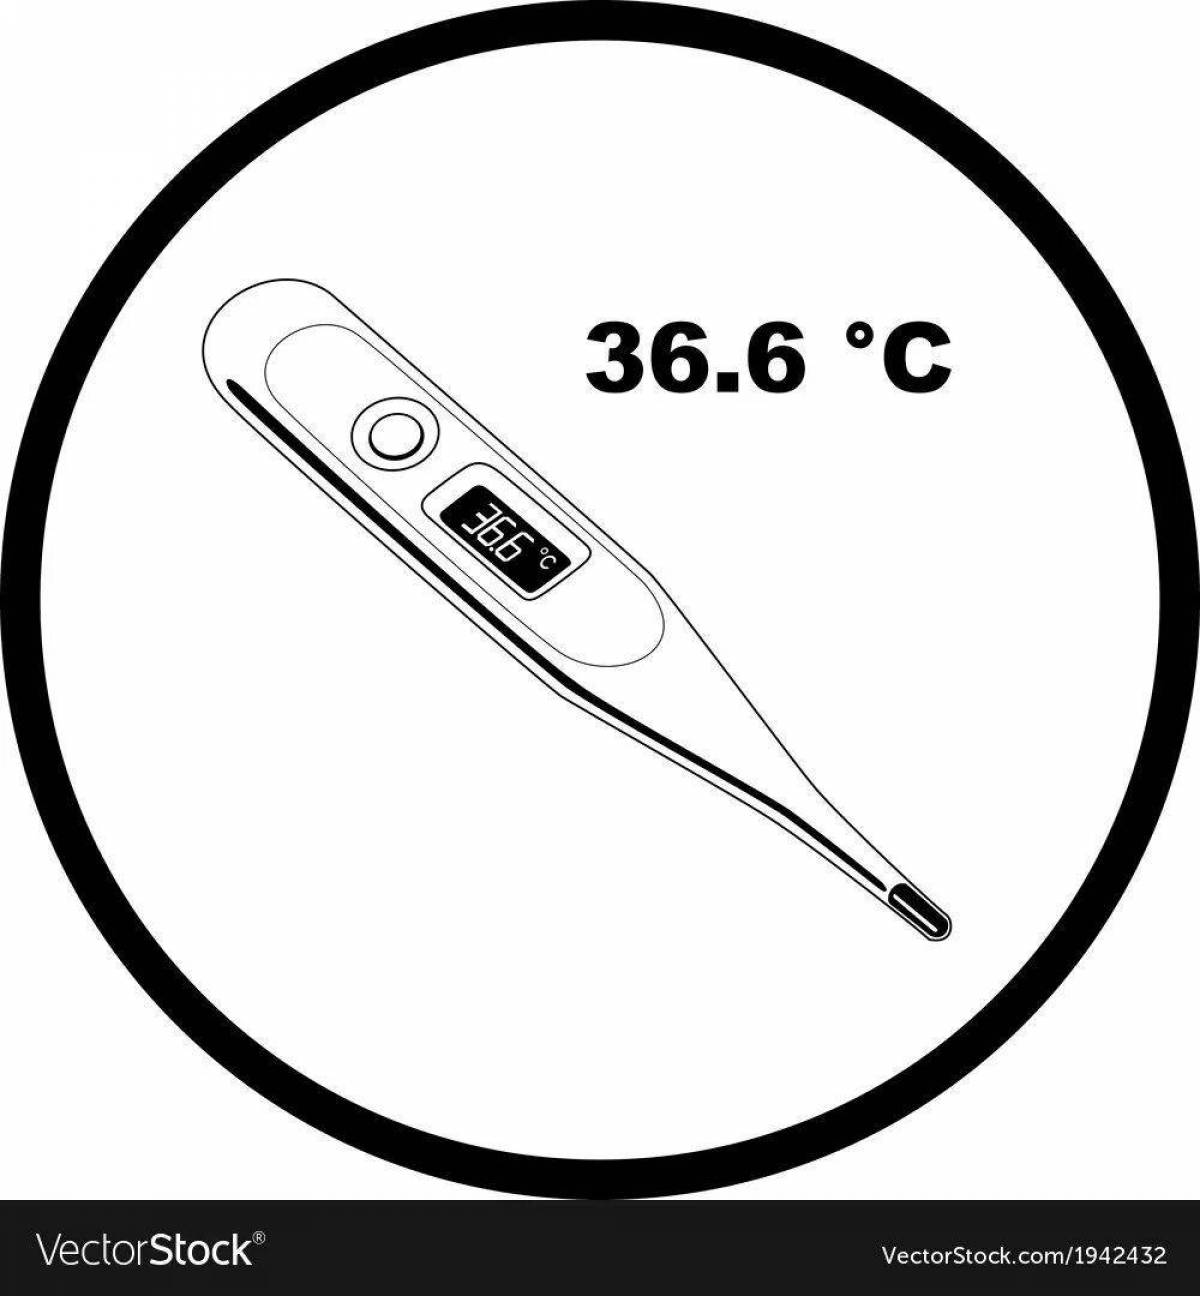 Colourful fun coloring thermometer for kids